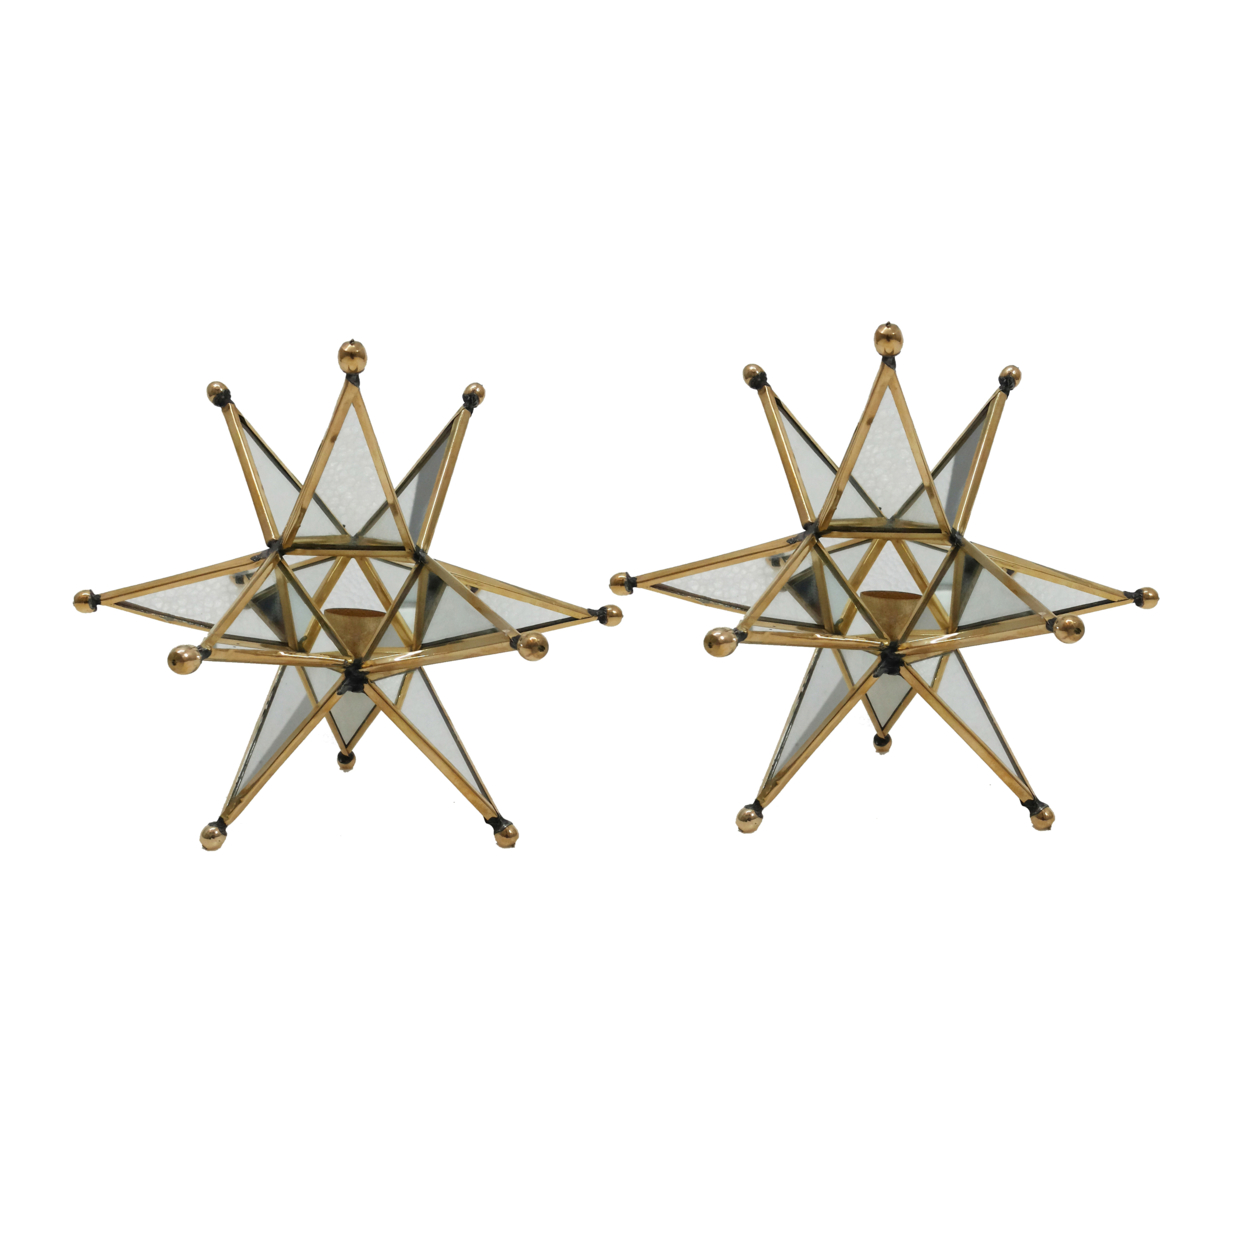 Set Of 2 Candle Holders, Golden Star Style Accent Table Decorations, Glass- Saltoro Sherpi